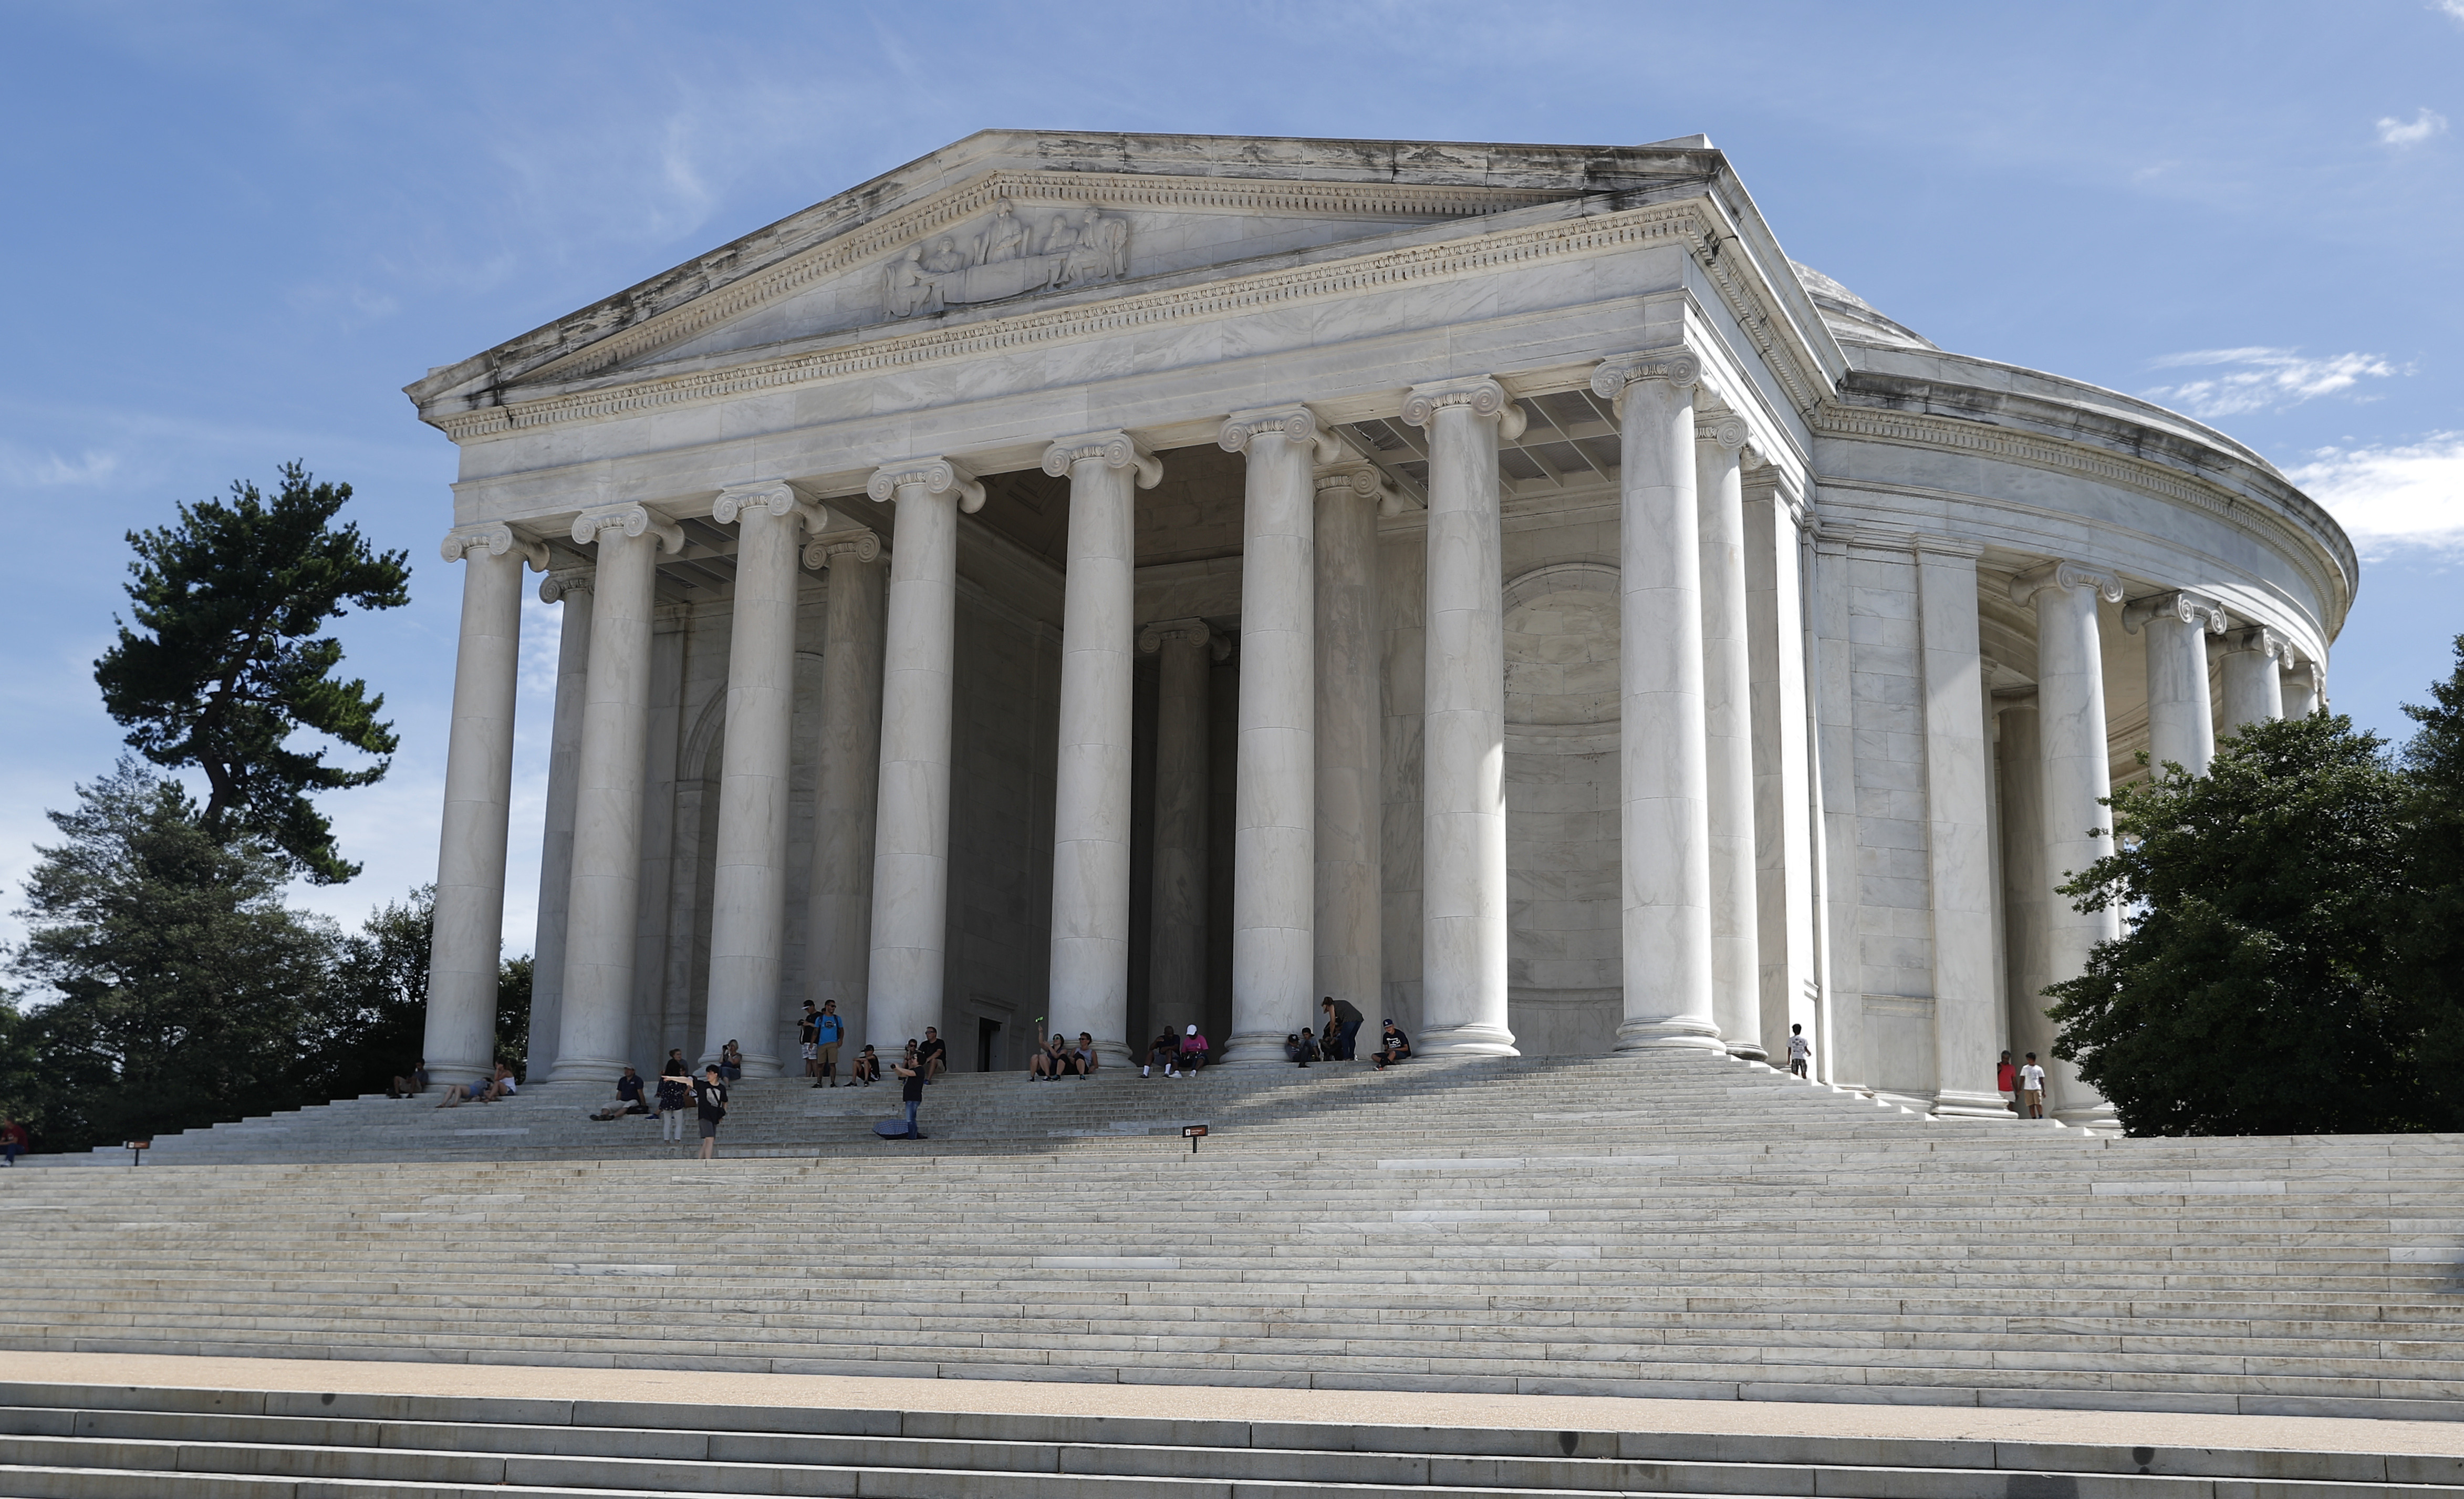 Mysterious gunk is growing on the Jefferson Memorial